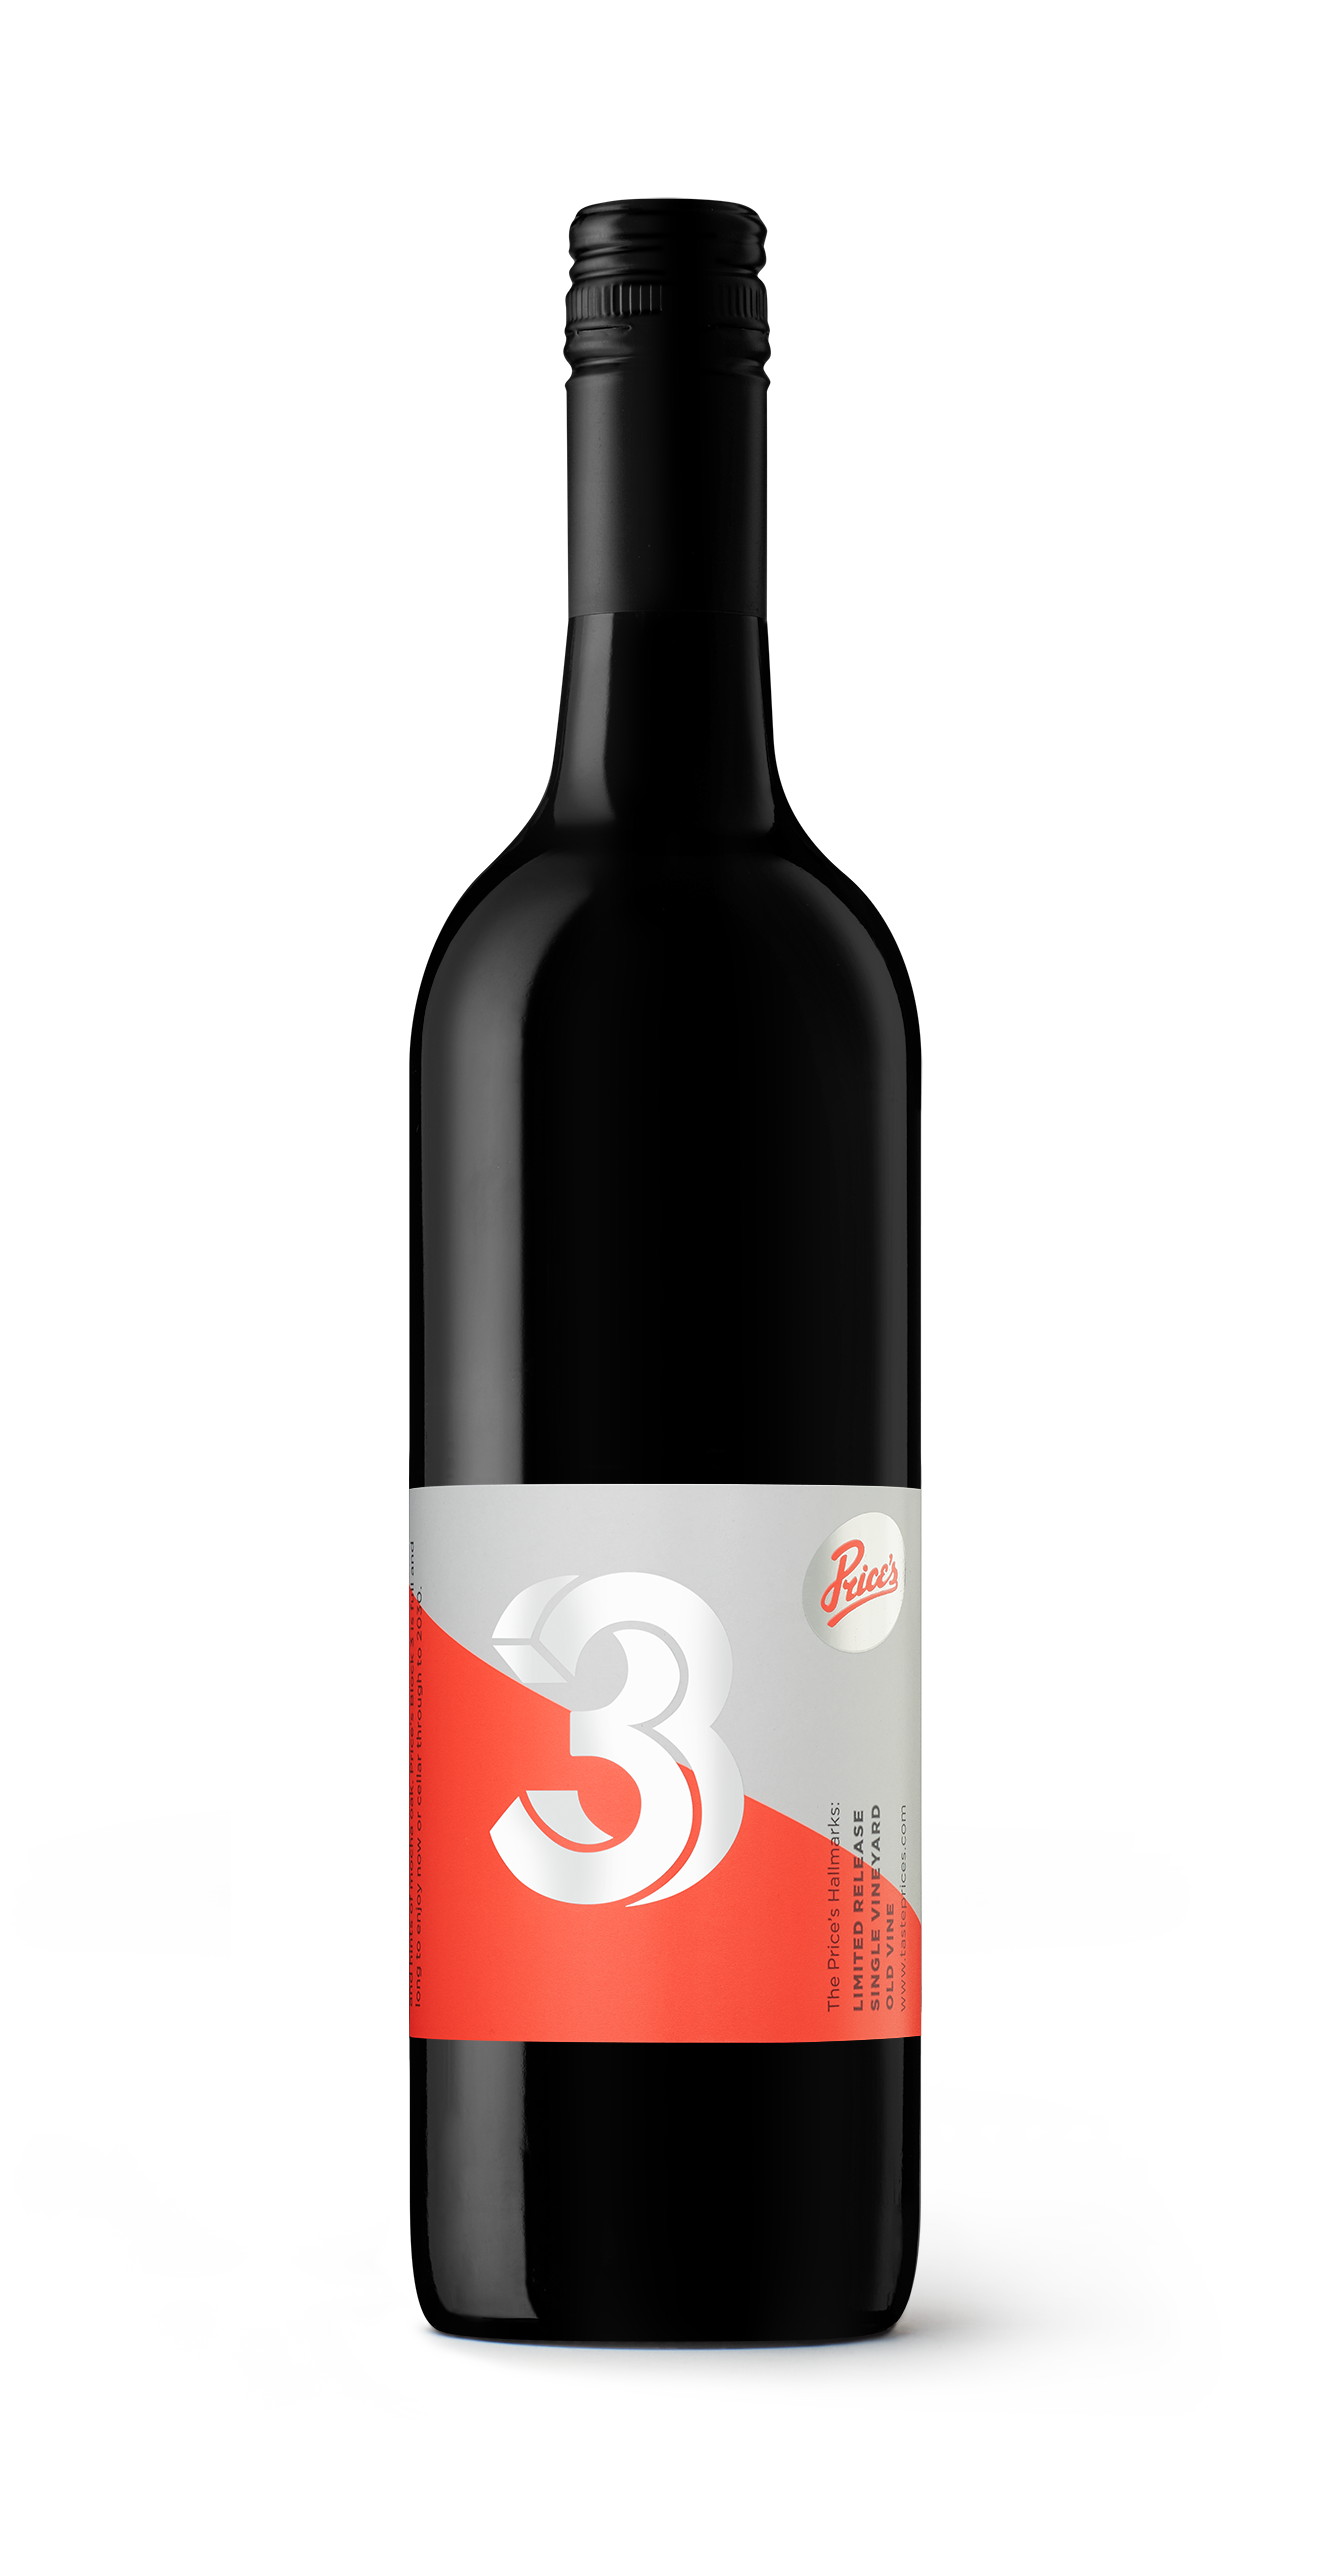 This bottle of Shiraz blend is from McLaren Vale. Block 3 is a medium to full-bodied wine produced from old vines. It has a striking label and is of excellent quality from Price's Wines.